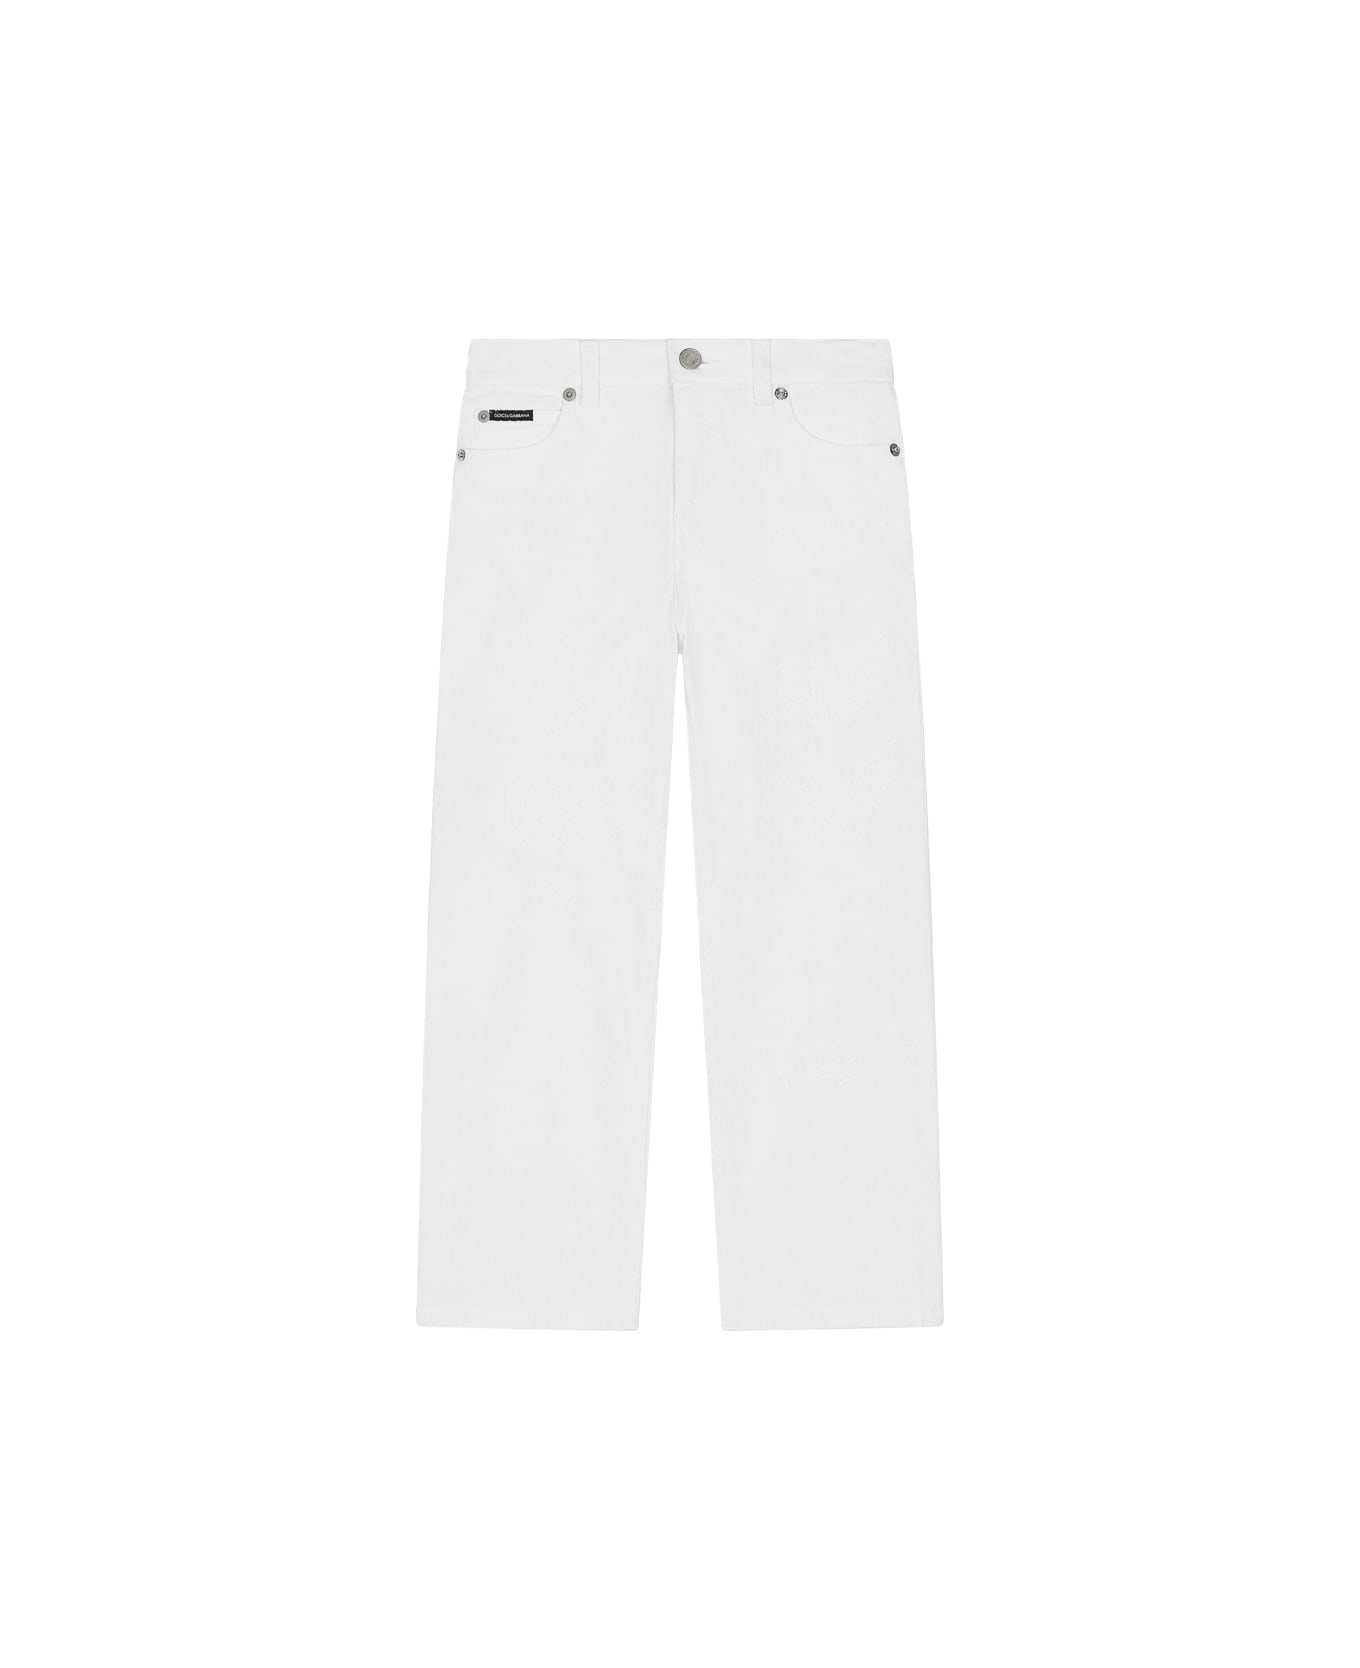 Dolce & Gabbana 5 Pocket White Denim Trousers With Tears - White ボトムス